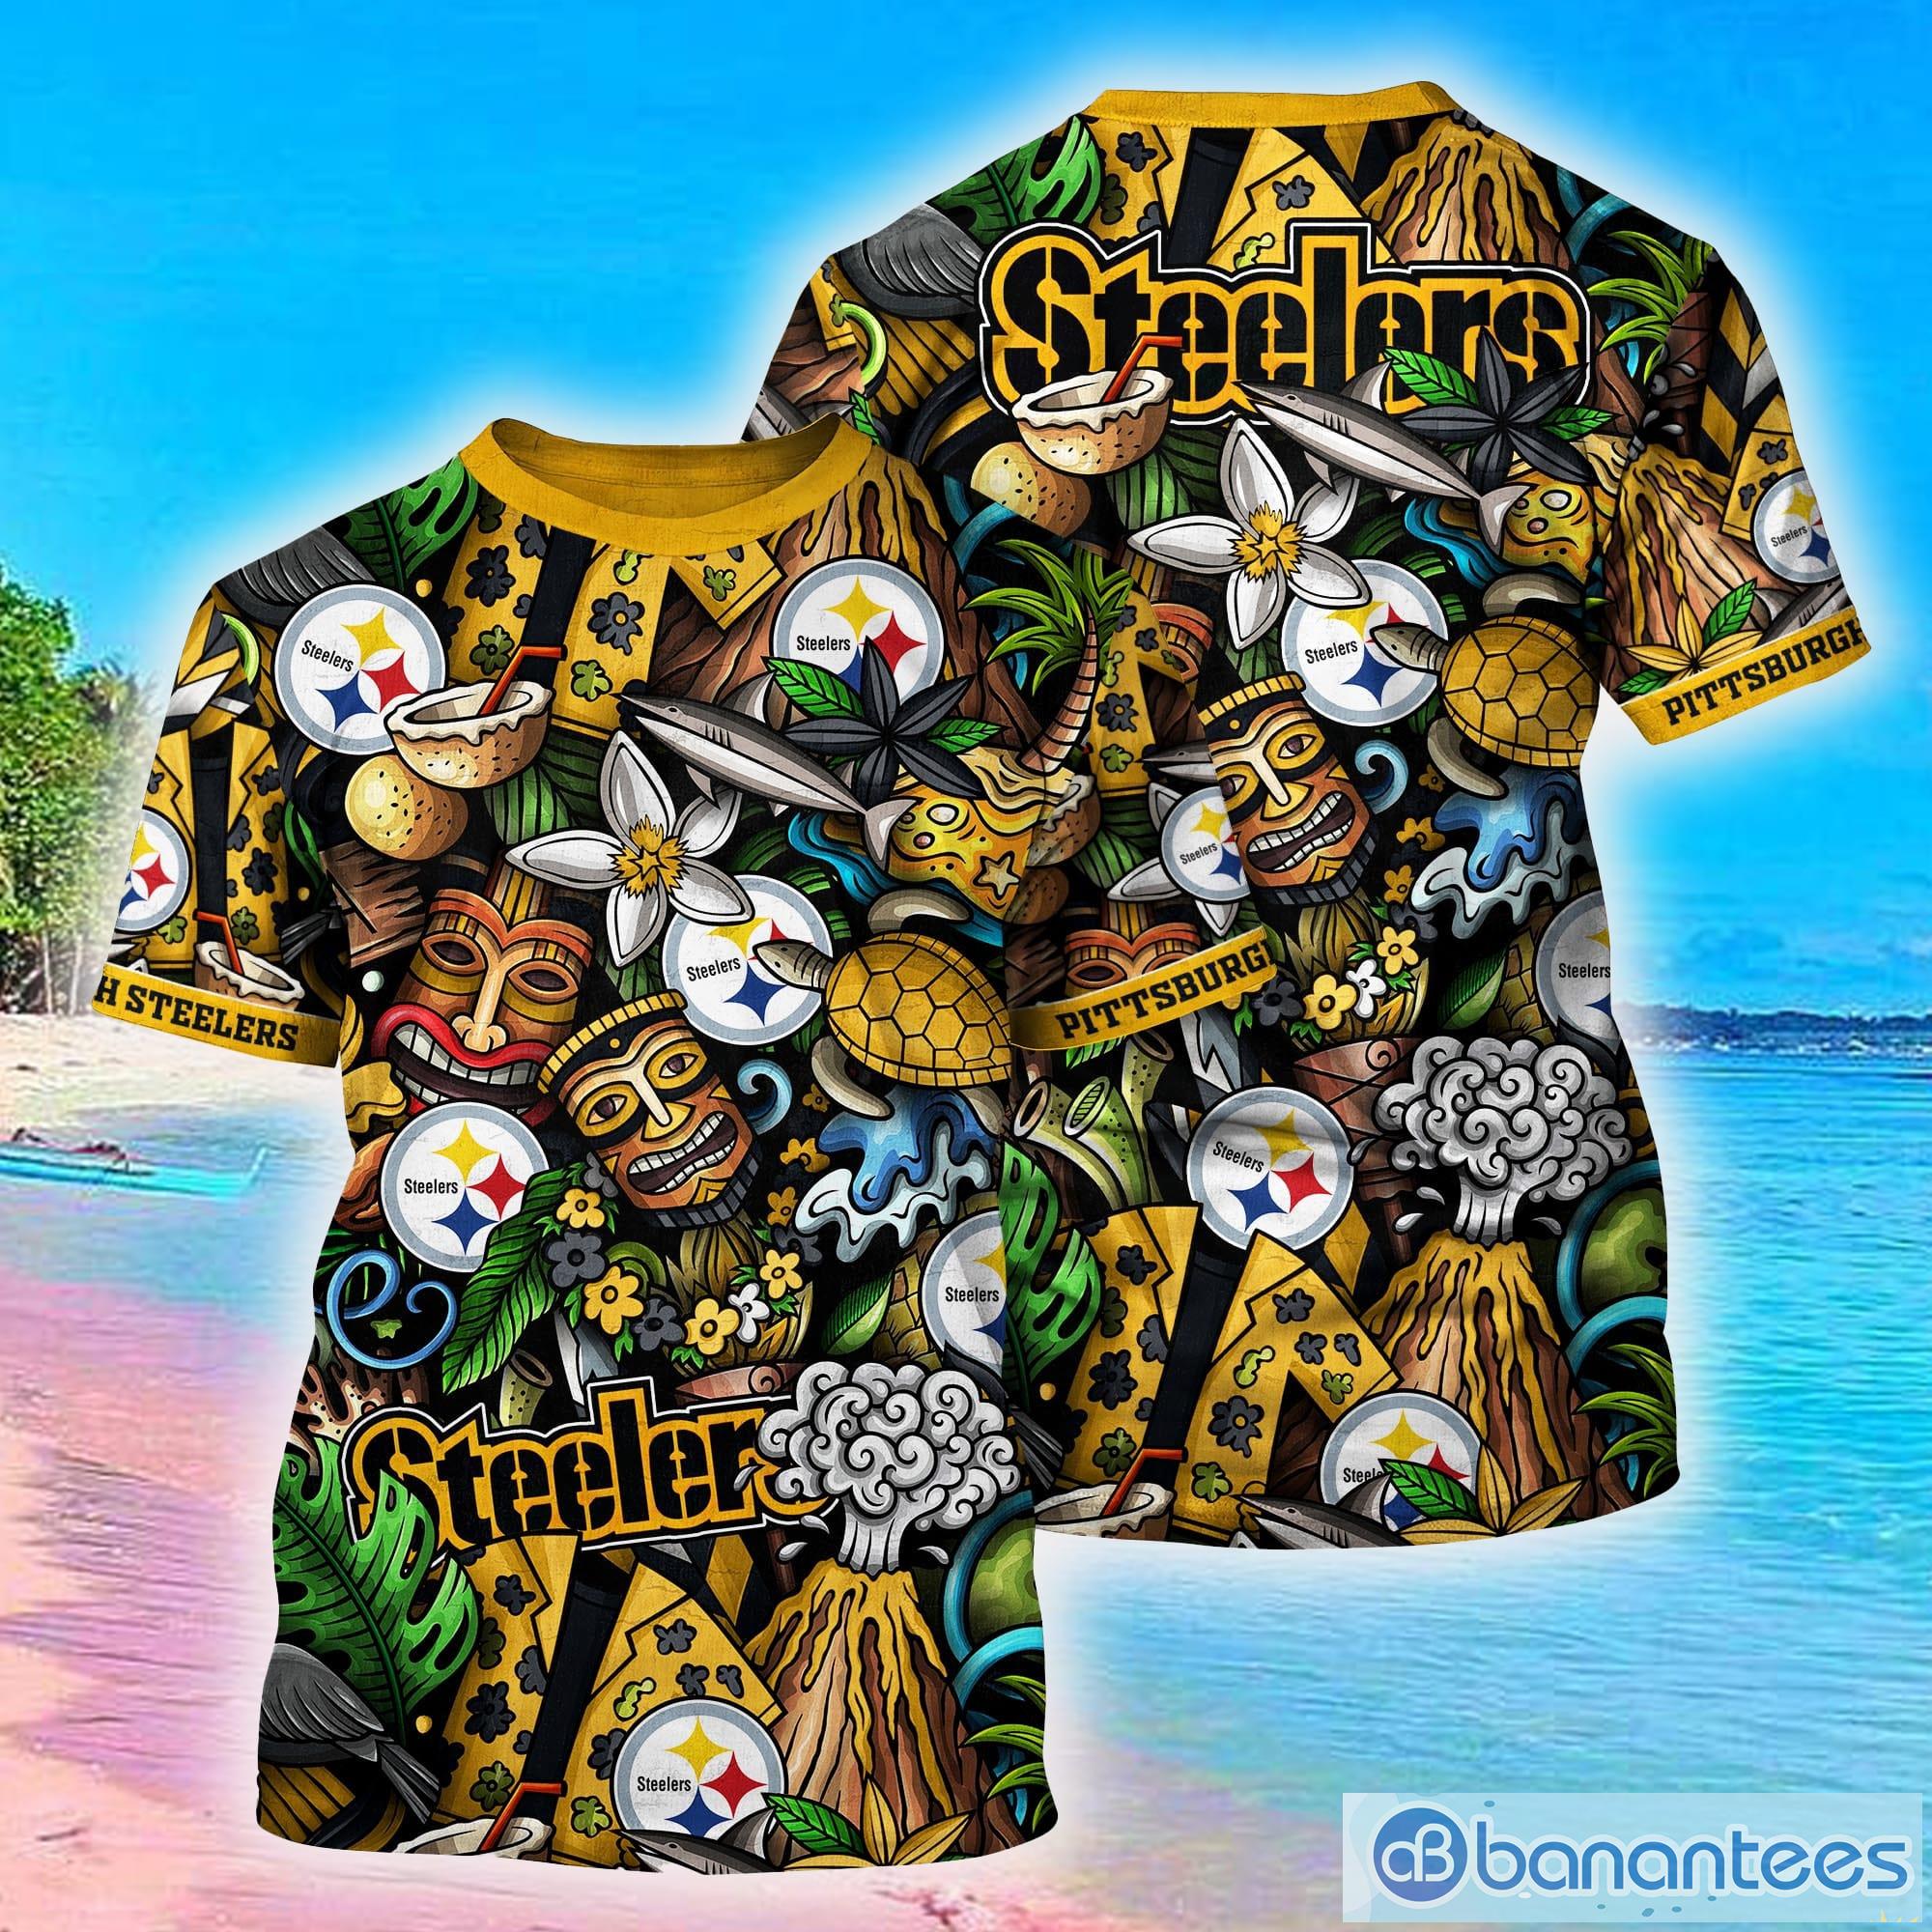 steelers gift for him